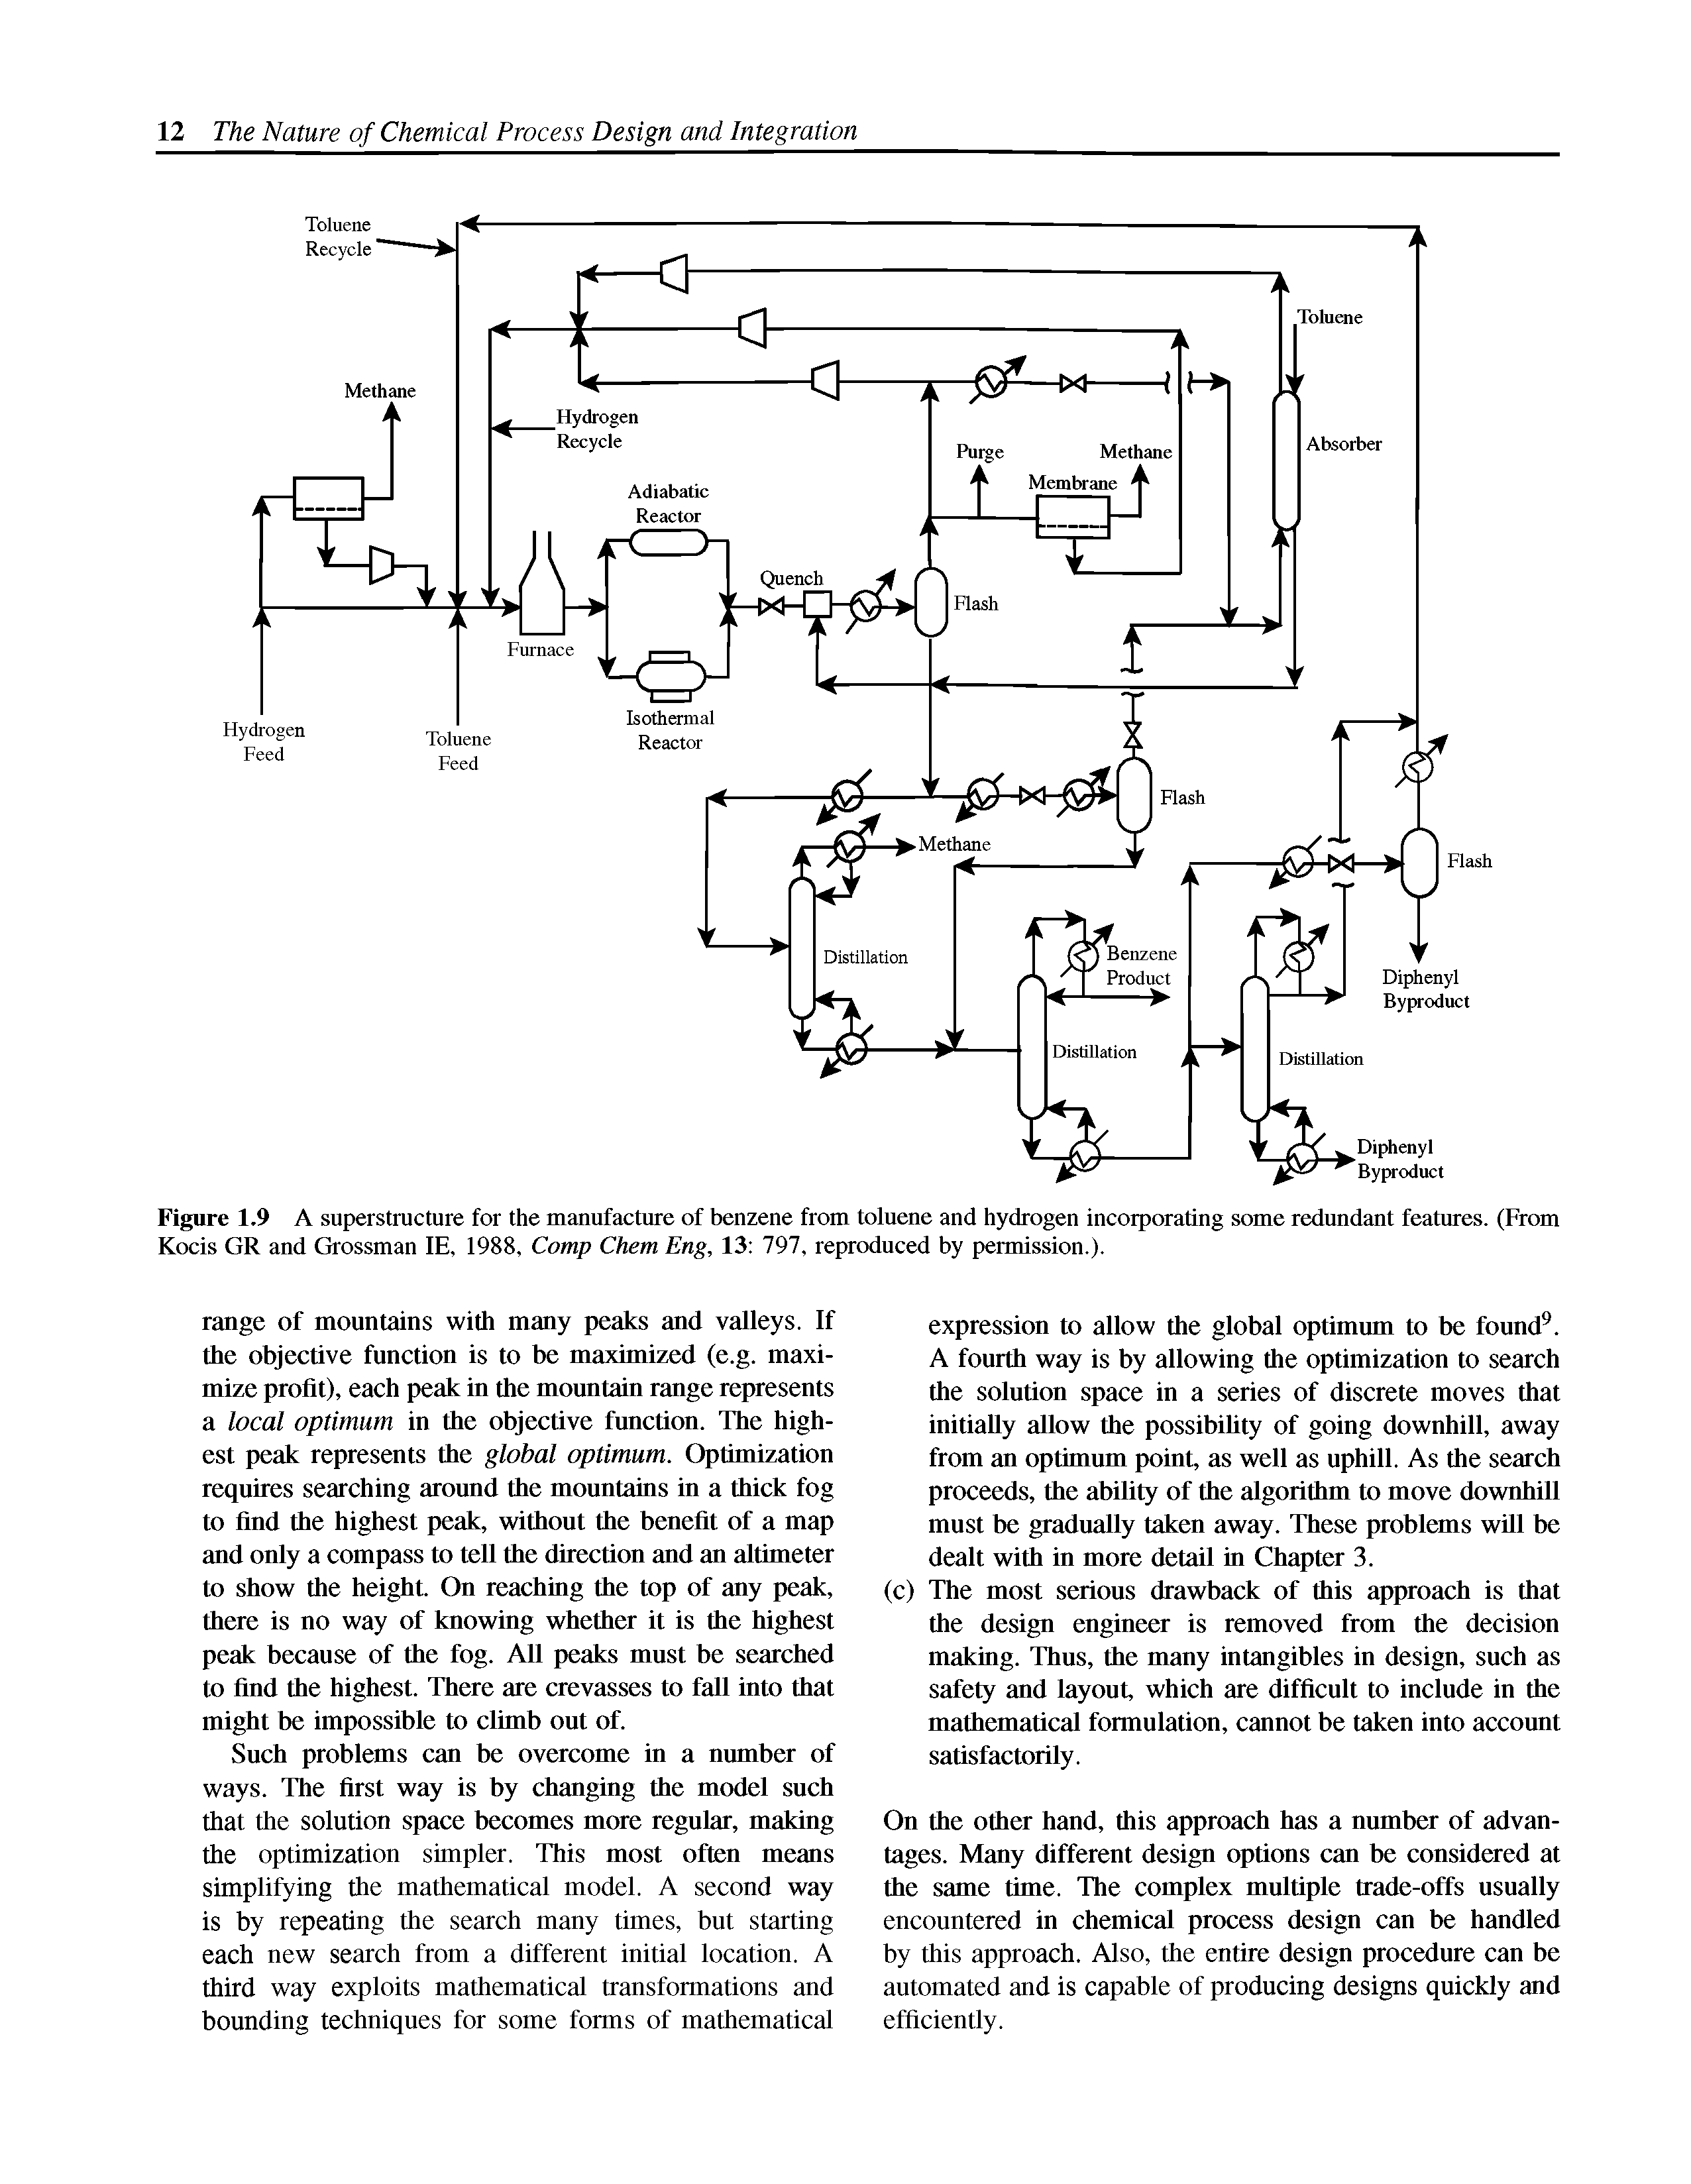 Figure 1.9 A superstructure for the manufacture of benzene from toluene and hydrogen incorporating some redundant features. (From Kocis GR and Grossman IE, 1988, Comp Chem Eng, 13 797, reproduced by permission.).